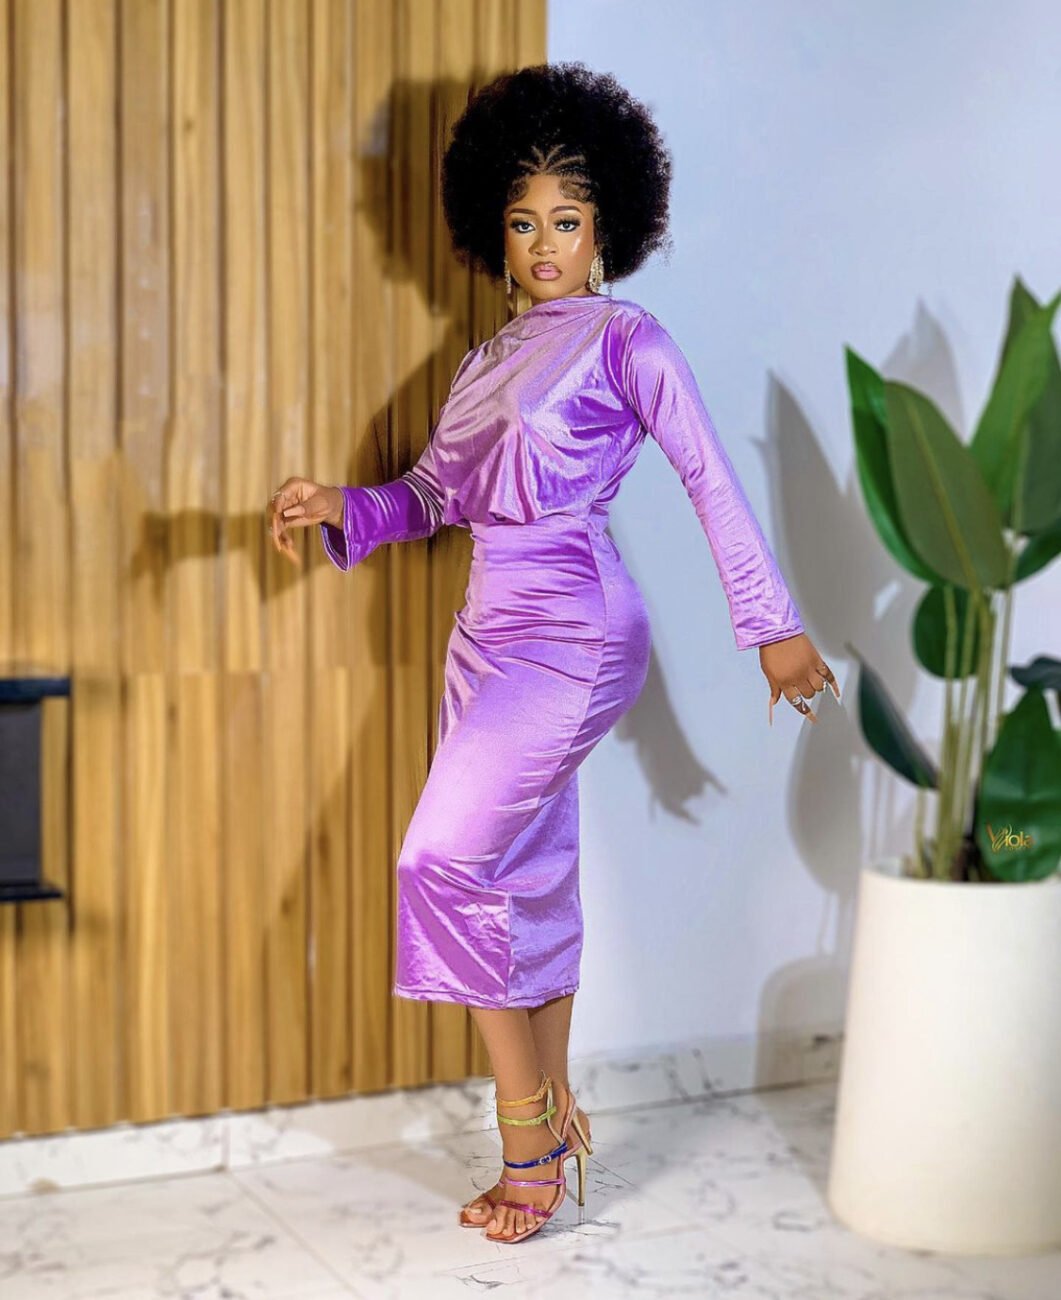 Phyna in a purple satin two piece outfit.